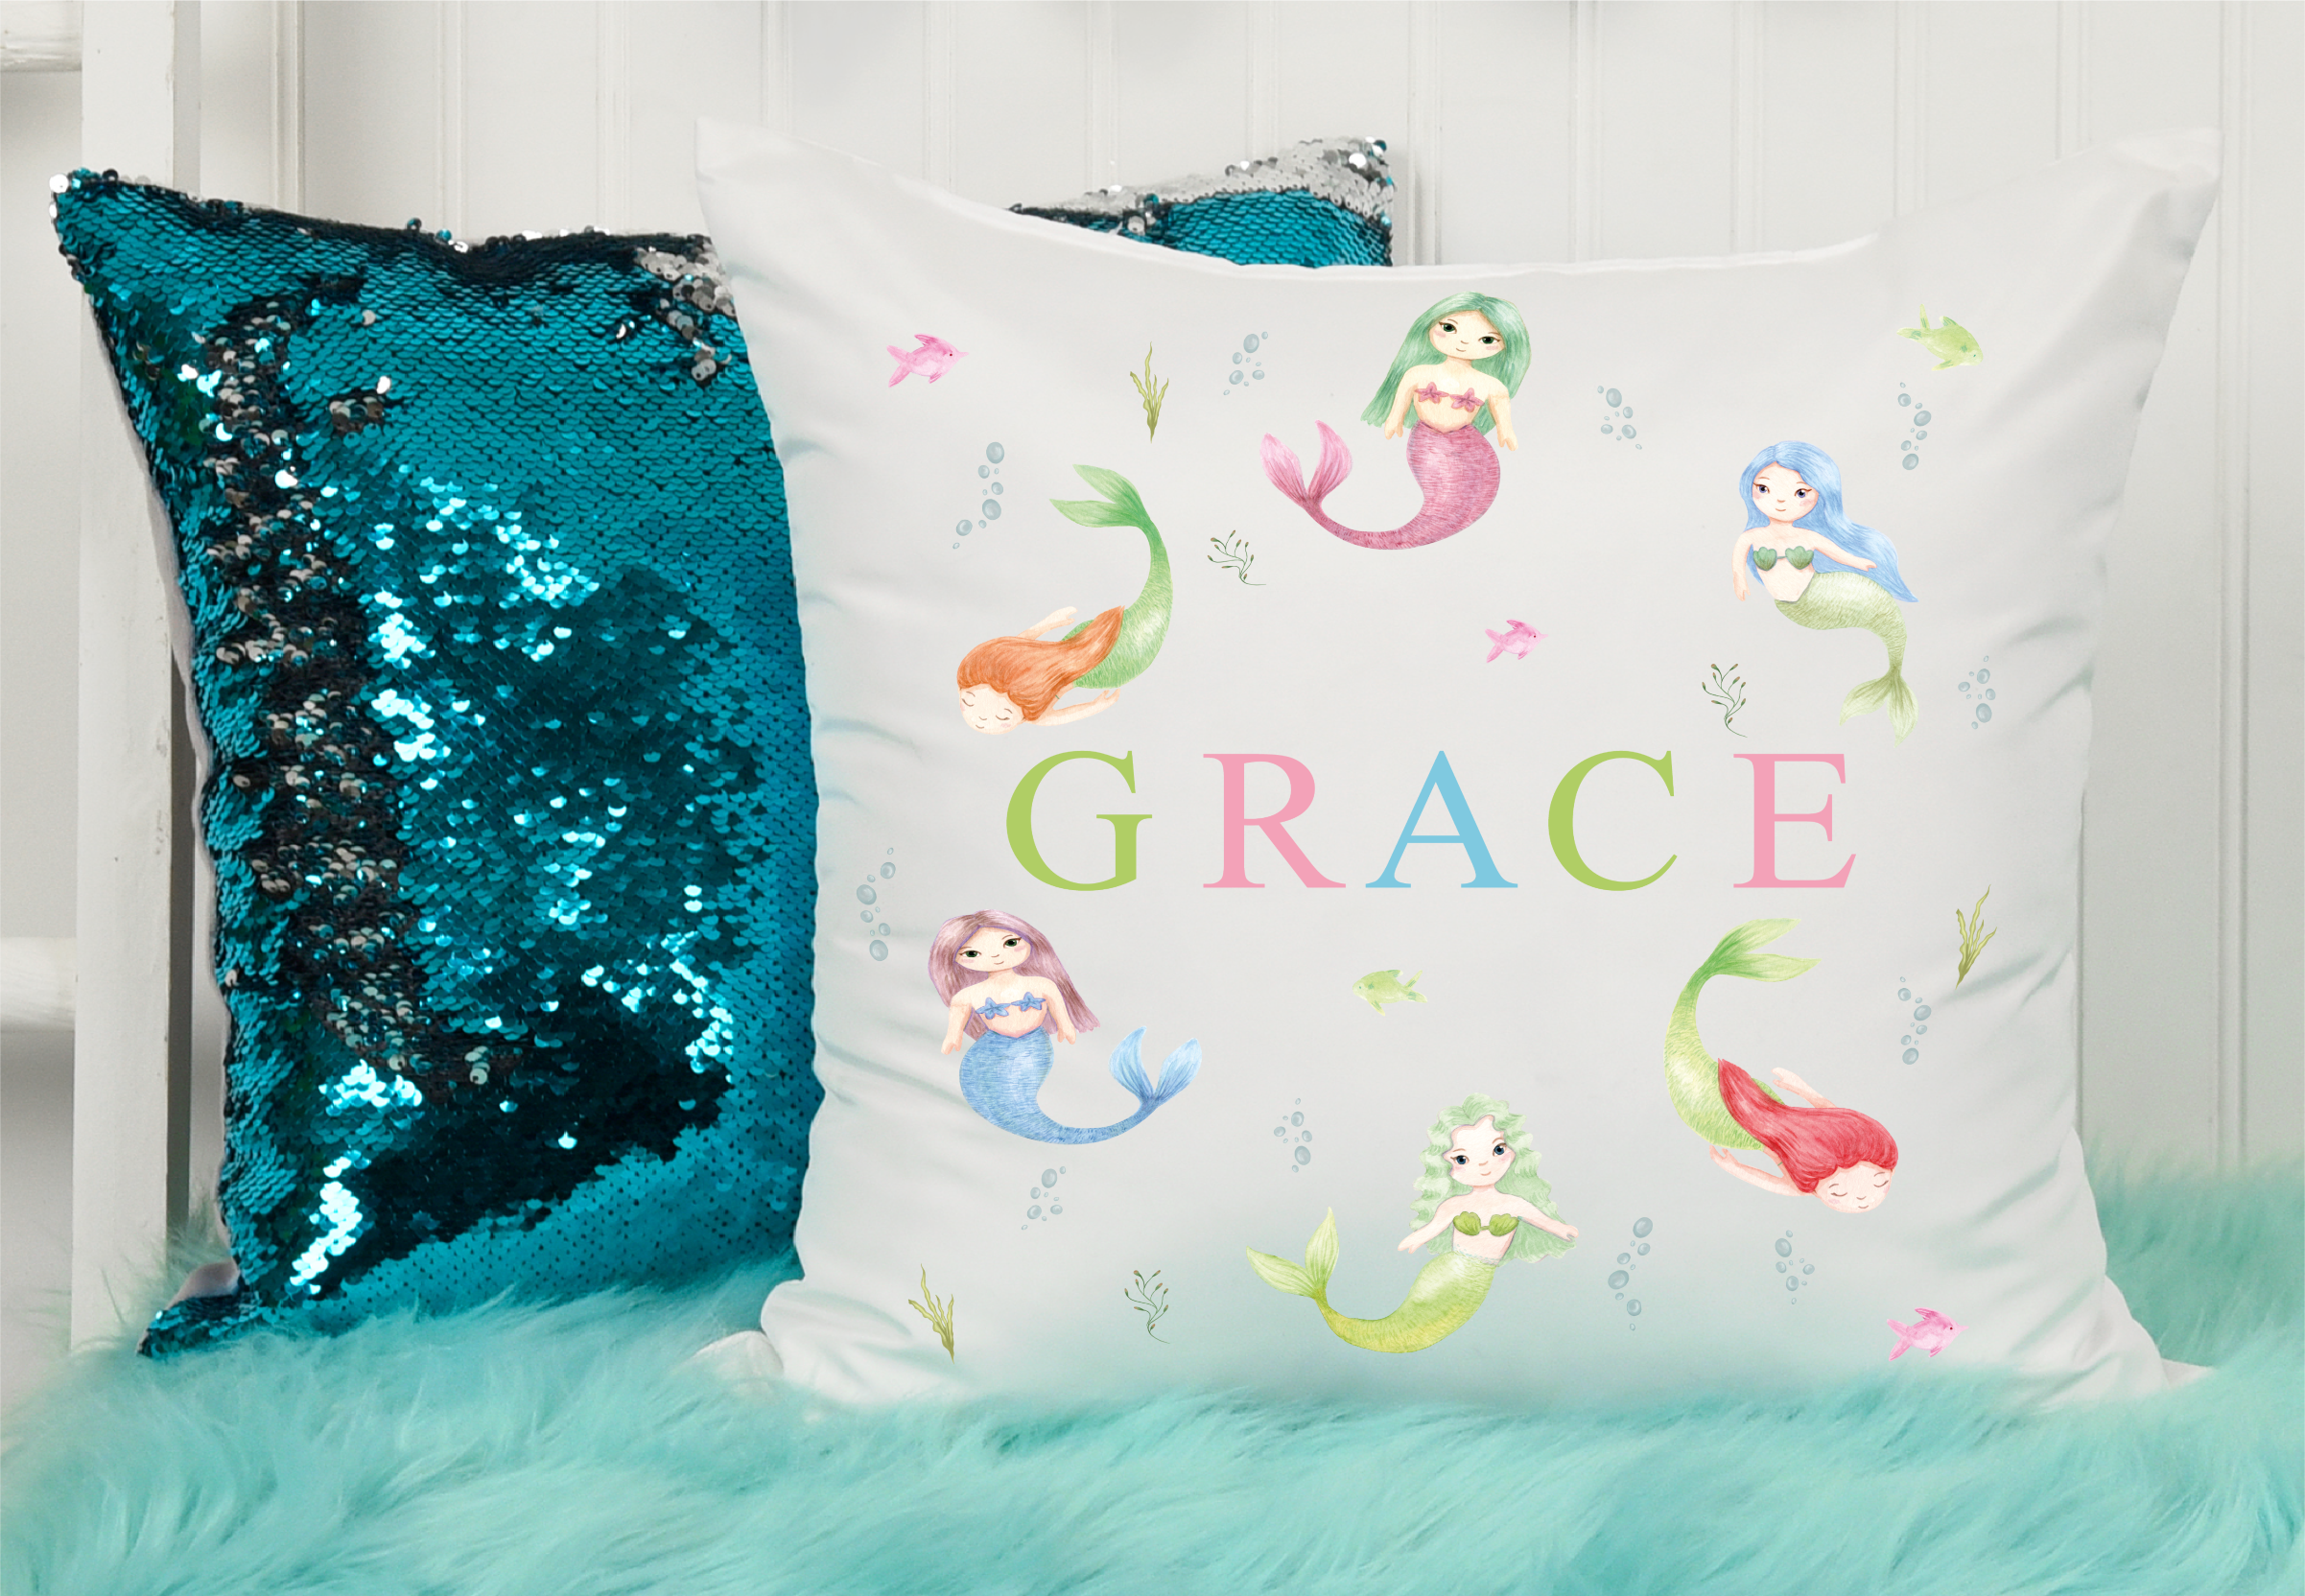 'Pretty Mermaids' Personalised Cushion, Pillow, Gift For Girls, Mermaid Themed Bedroom Accessory,Decor